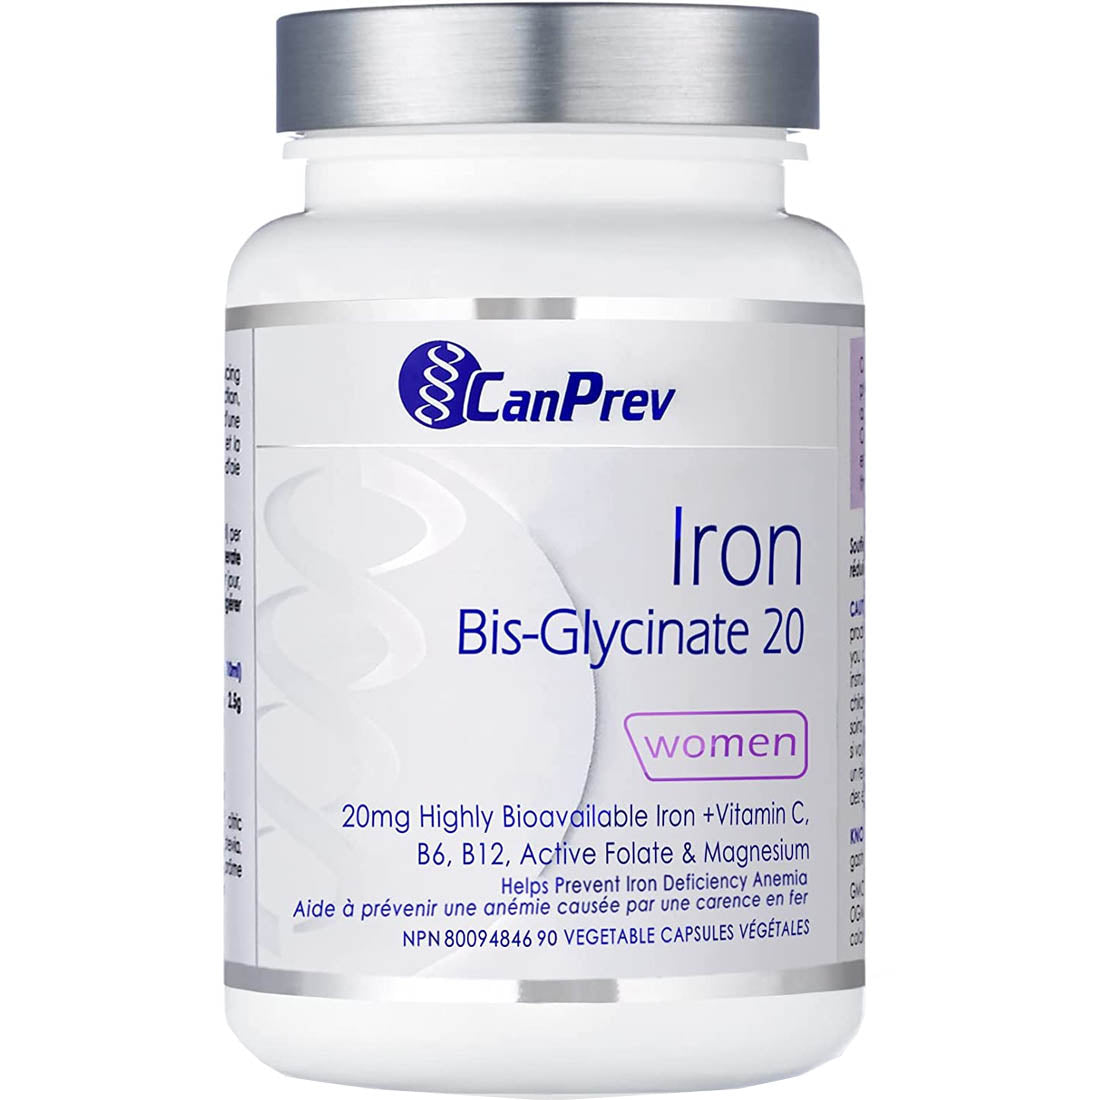 CanPrev Iron Bis-Glycinate 20mg (For Women), 90 Vegetable Capsules